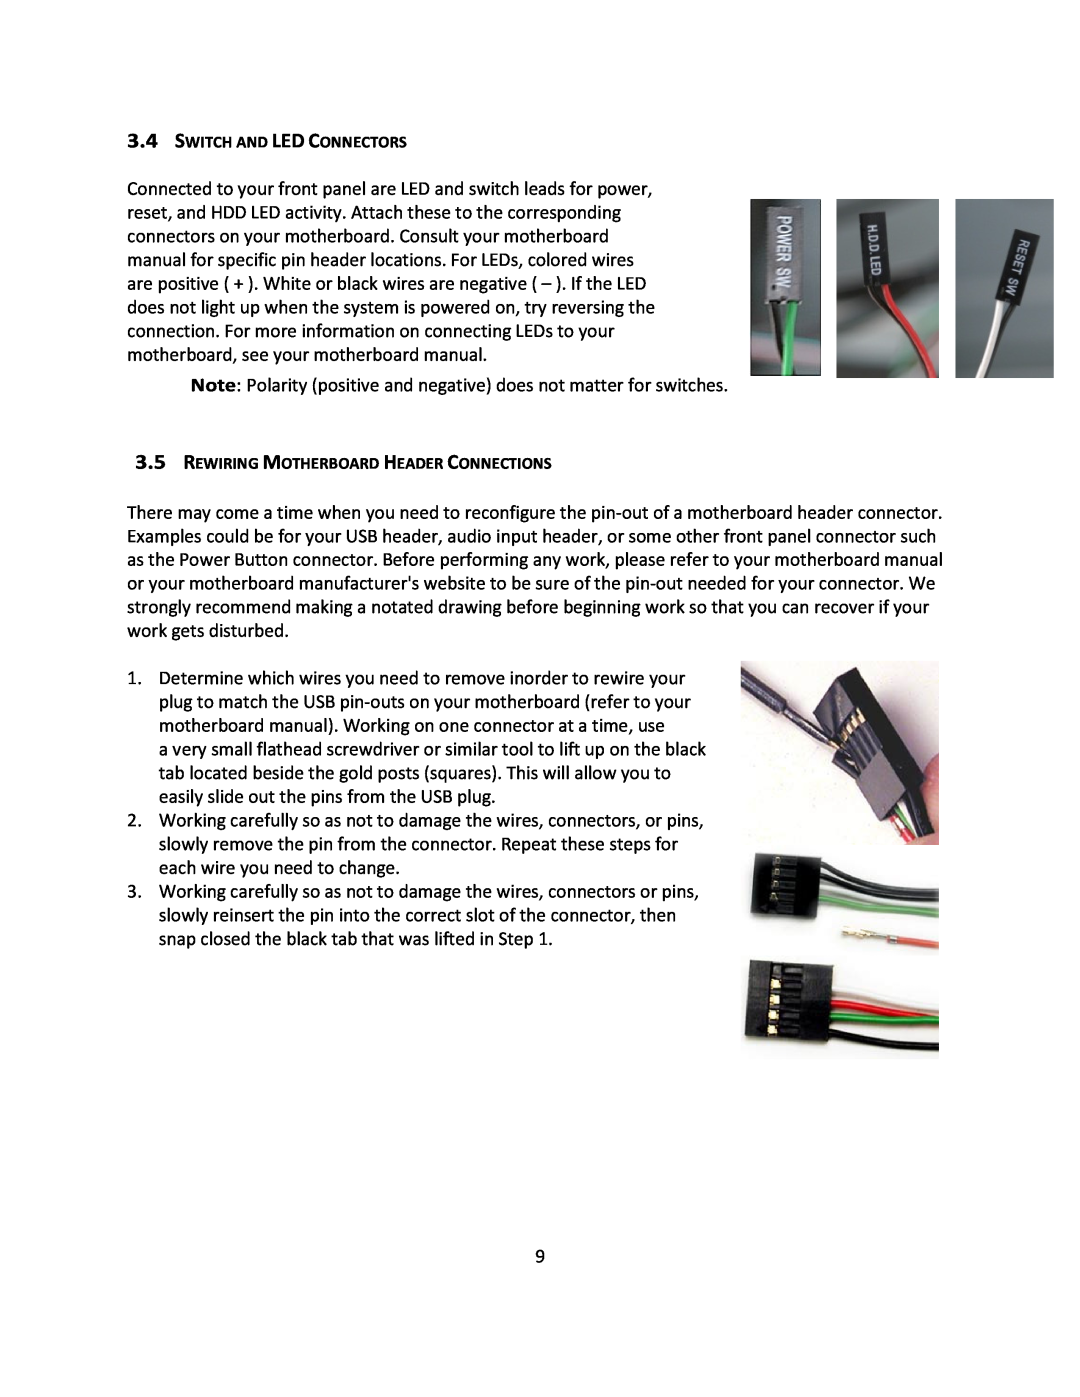 Antec P193 user manual Note Polarity positive and negative does not matter for switches 